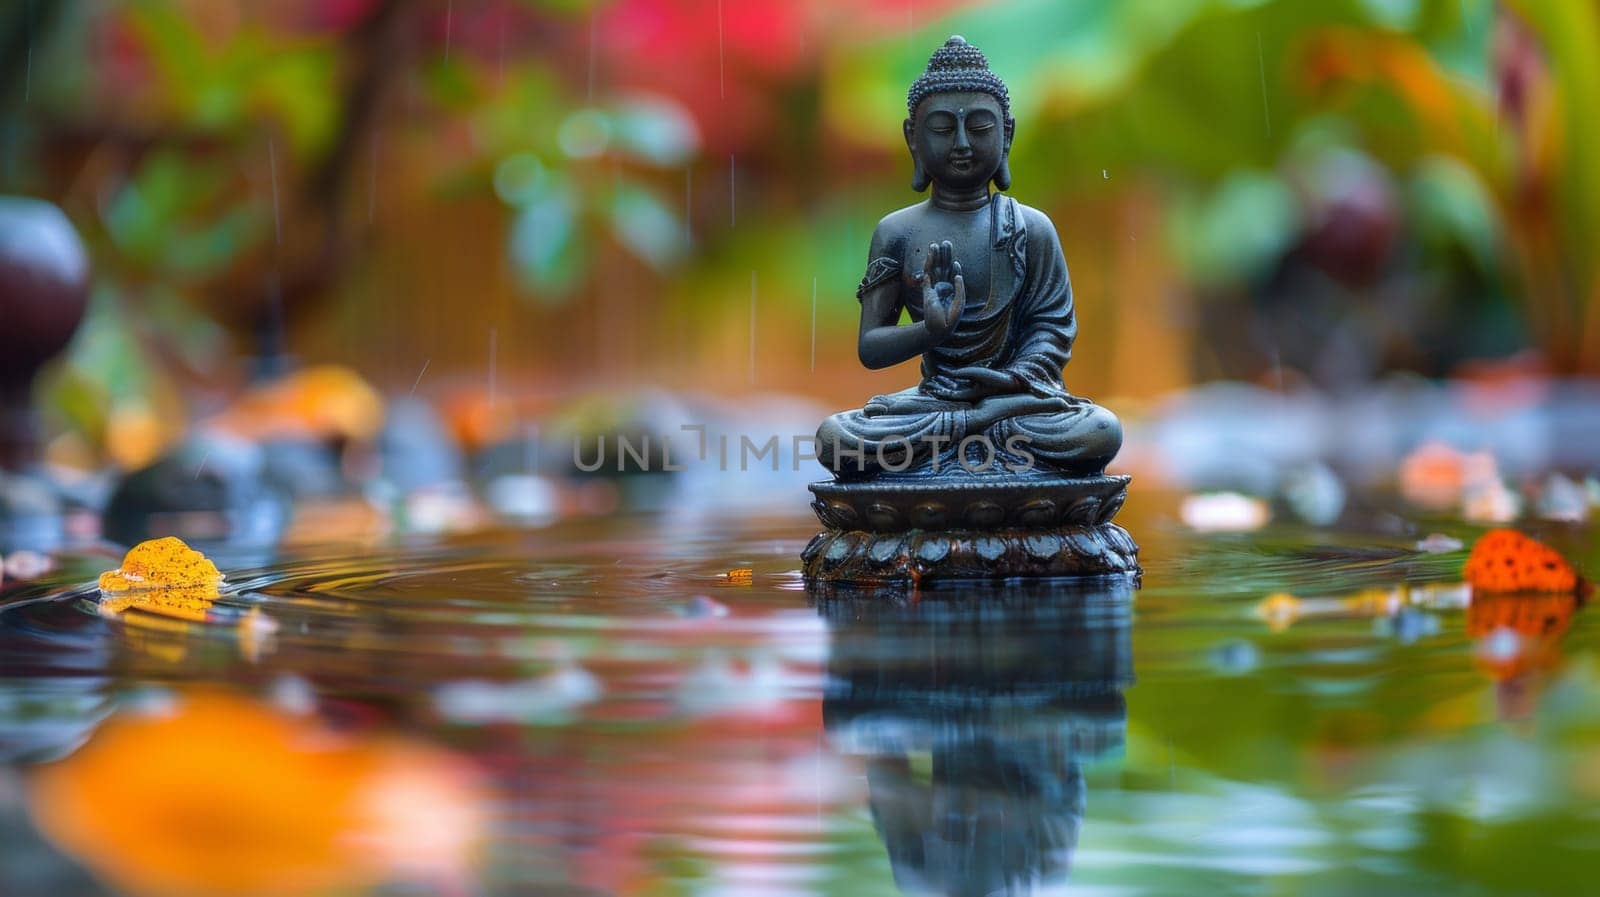 A statue of a buddha sitting in the water on top of some leaves